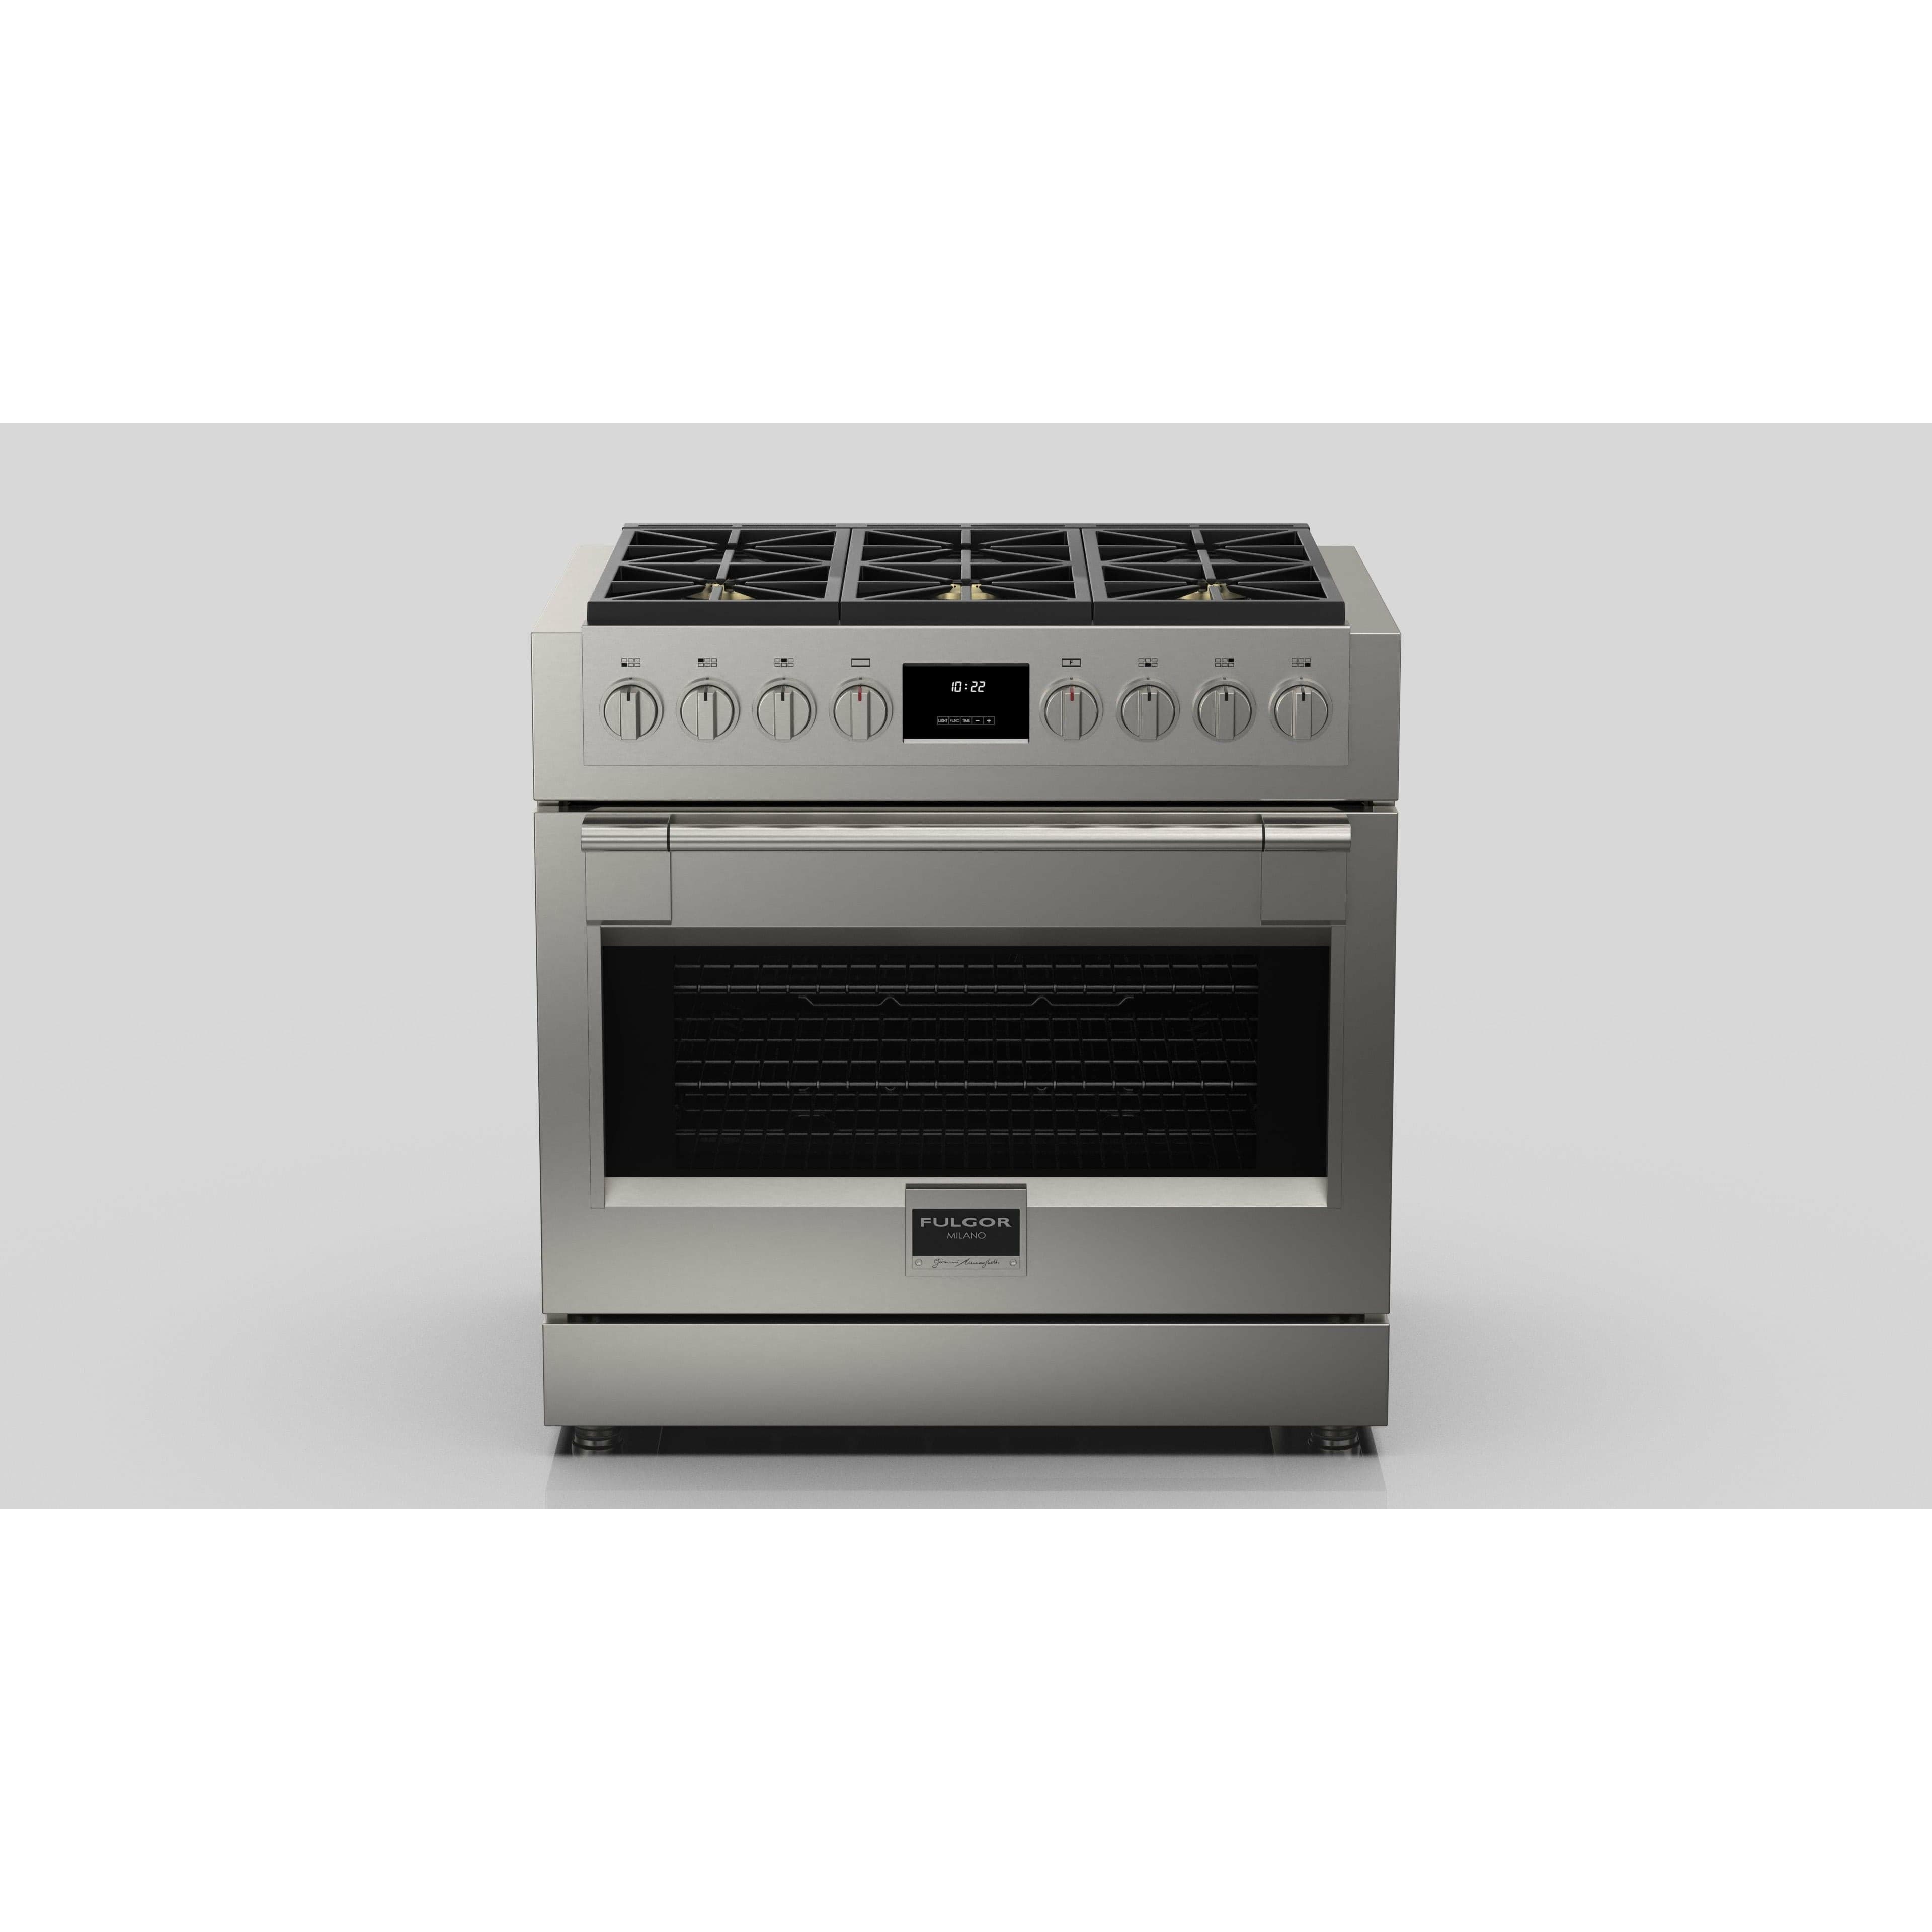 Fulgor Milano 36" Professional Gas Range with 6 Dual-Flame Burners, 5.7 cu. ft. Capacity, Stainless Steel - F6PGR366S2 Ranges F6PGR366S2 Luxury Appliances Direct